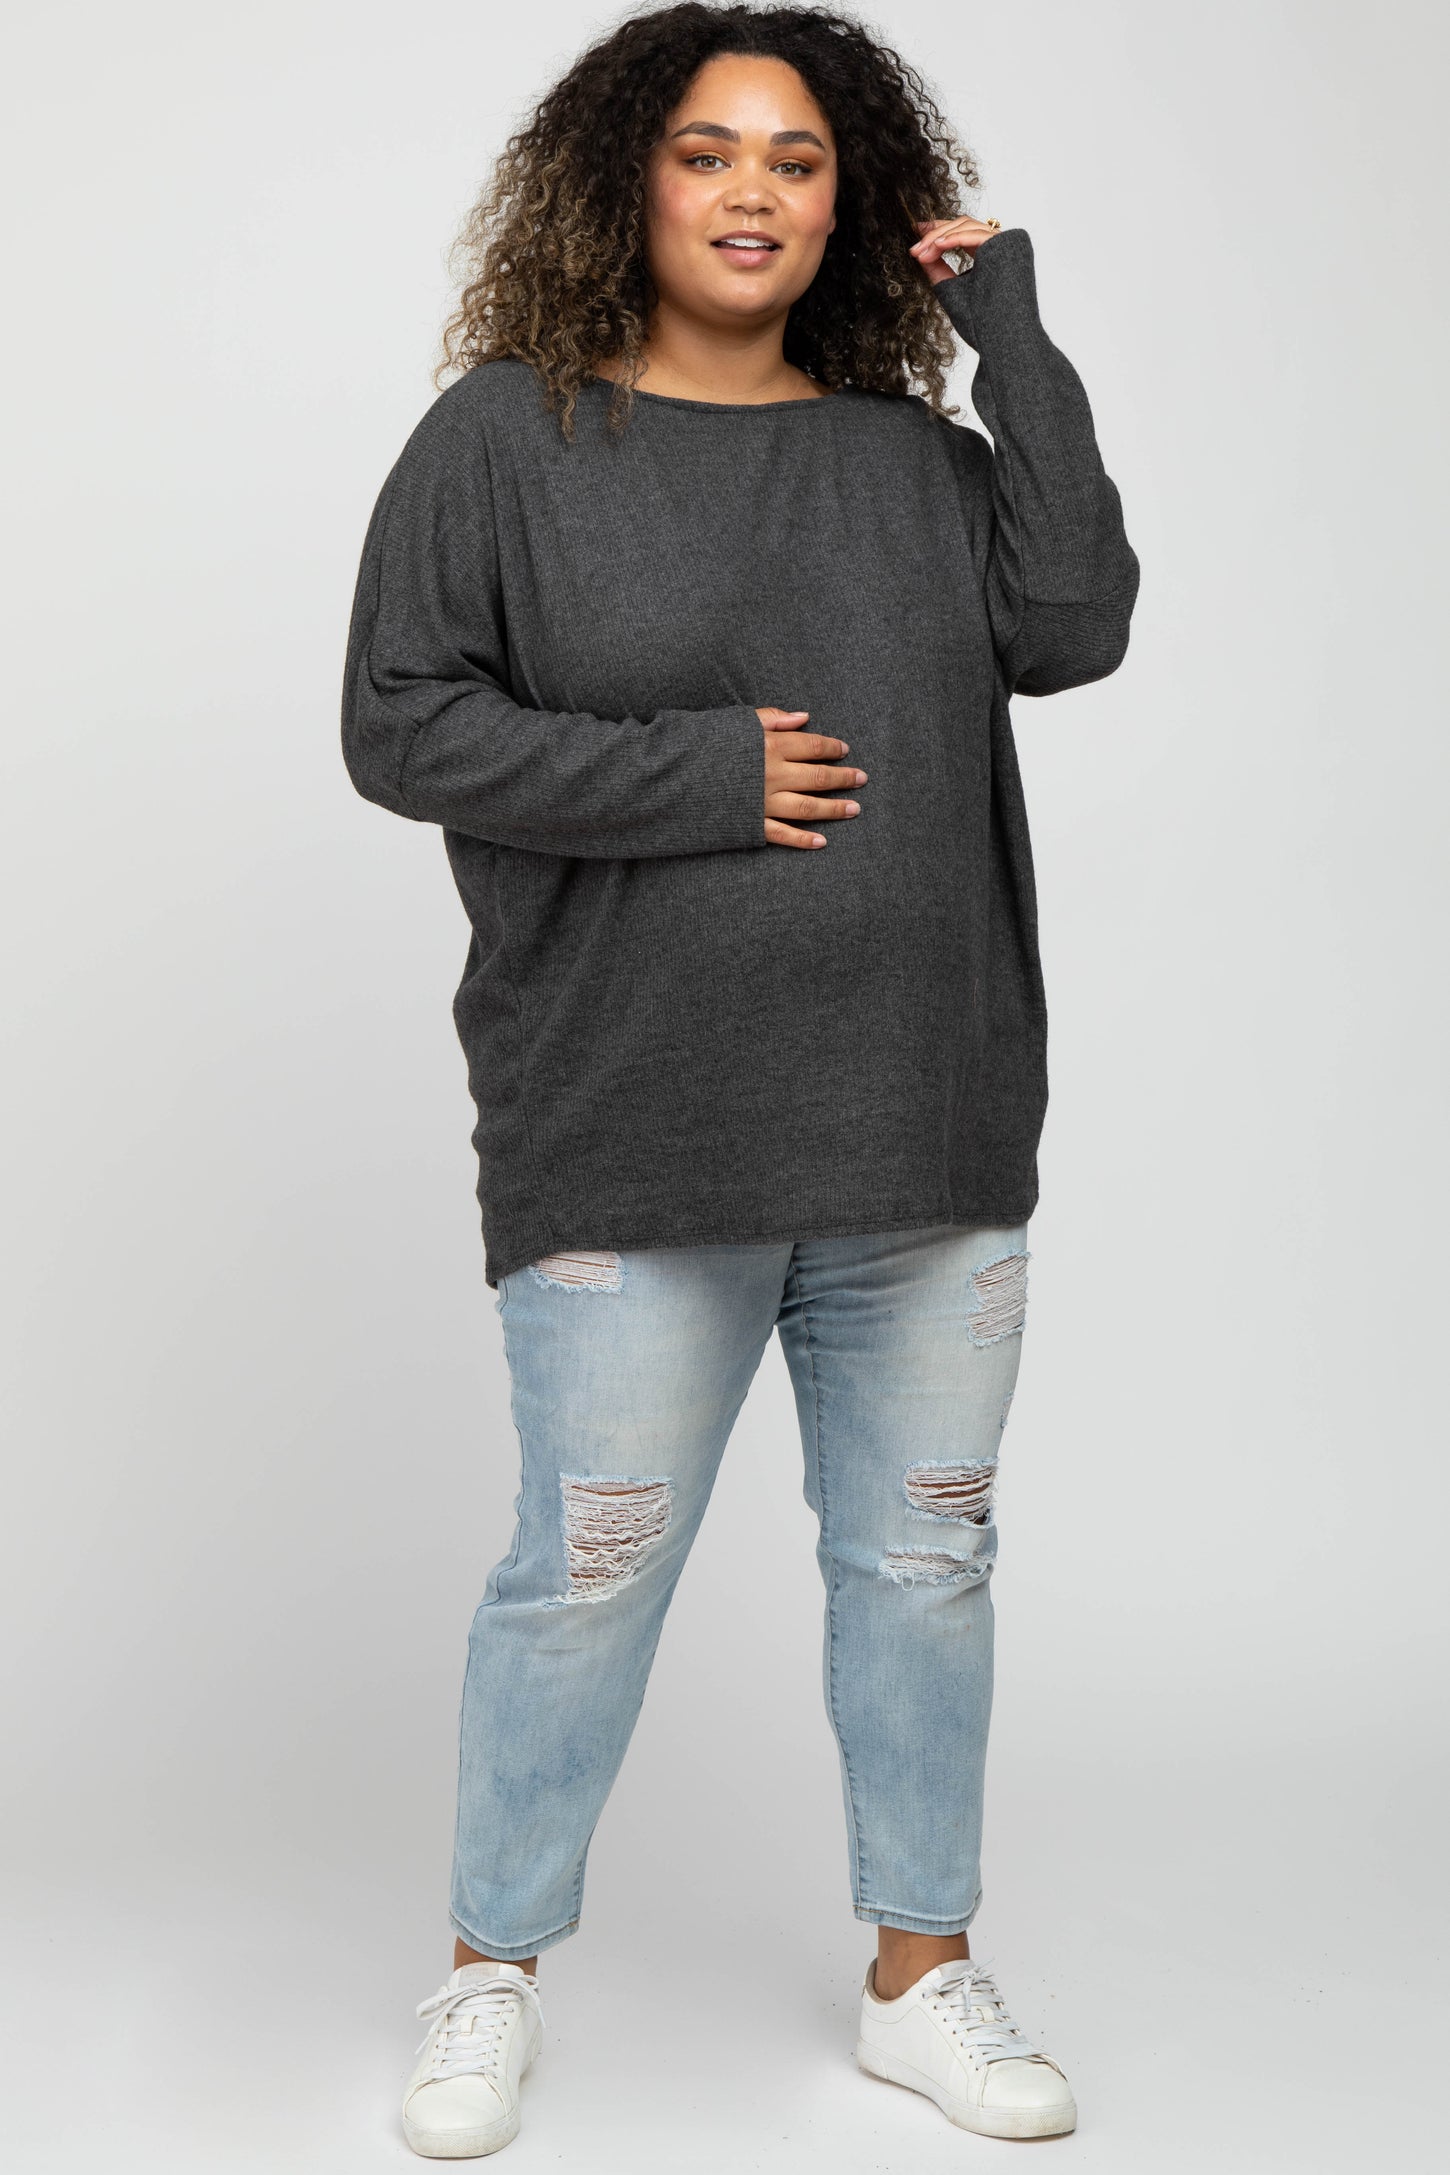 Charcoal Brushed Ribbed Dolman Sleeve Maternity Plus Top